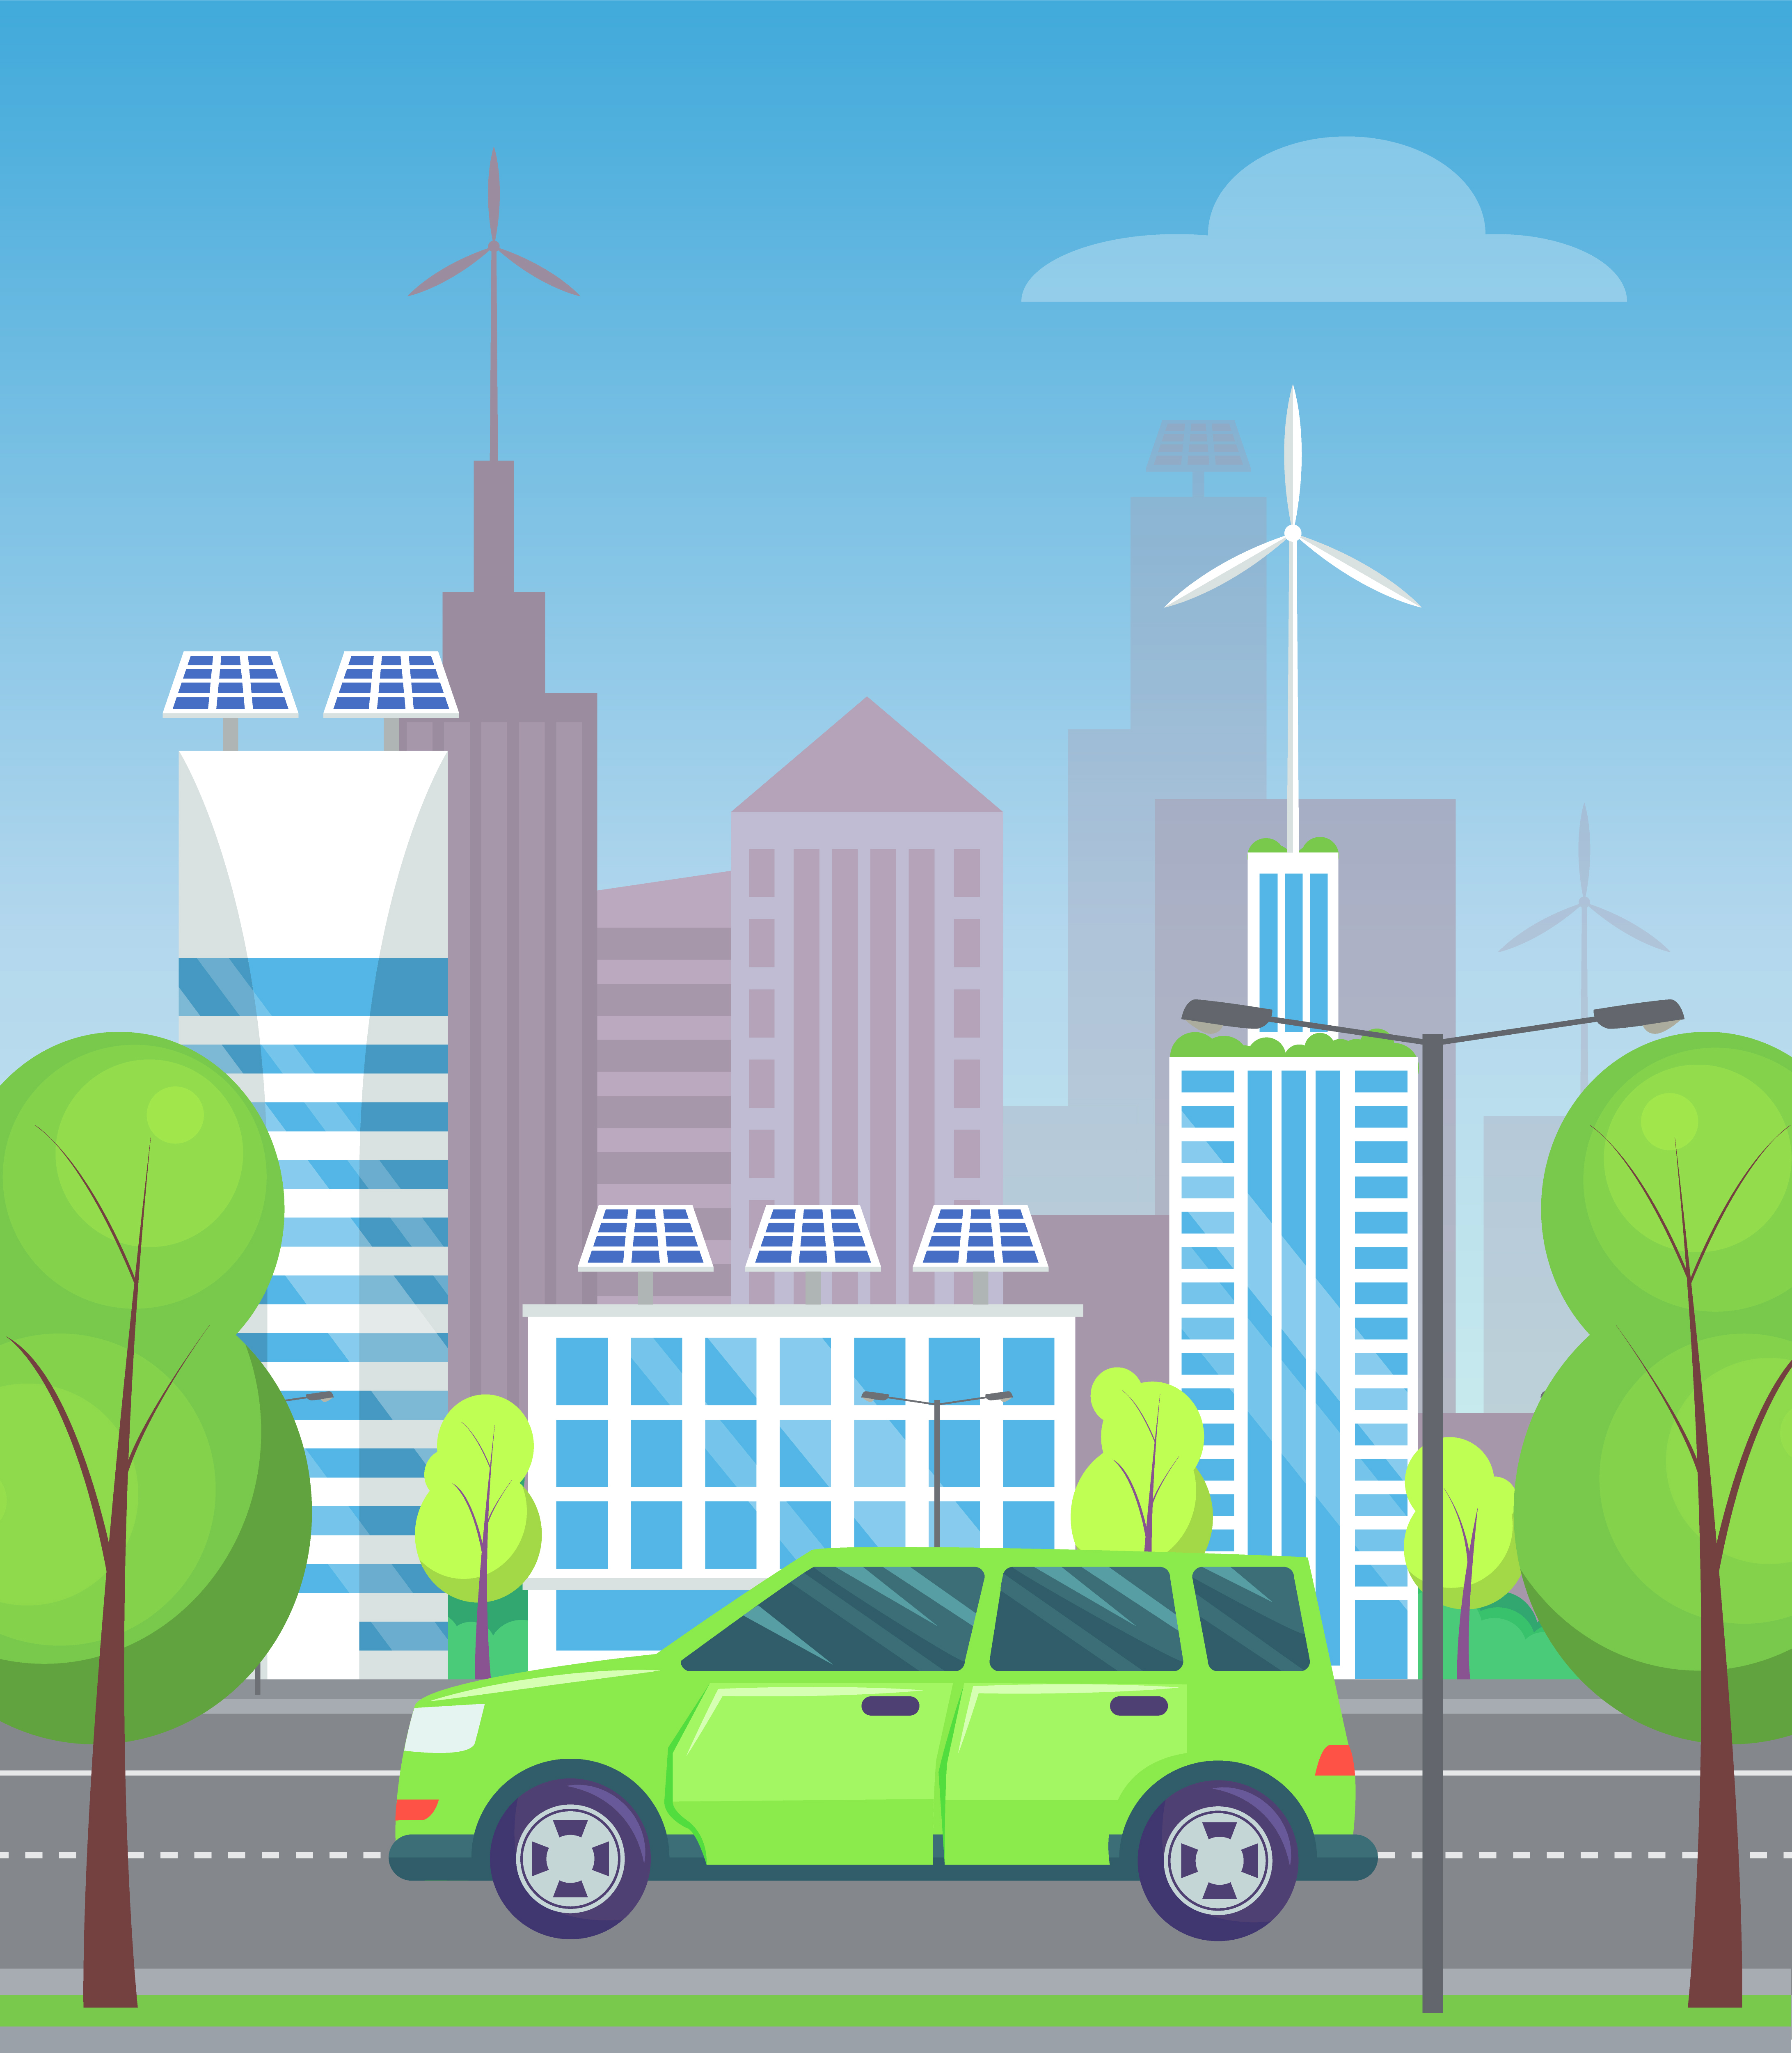 Green minivan or multi purpose vehicle rides on asphalted road in city. Green trees near highway, good weather. Cityscape with many buildings on background. Vector illustration in flat style. Minivan on City Highway, Cityscape and Trees